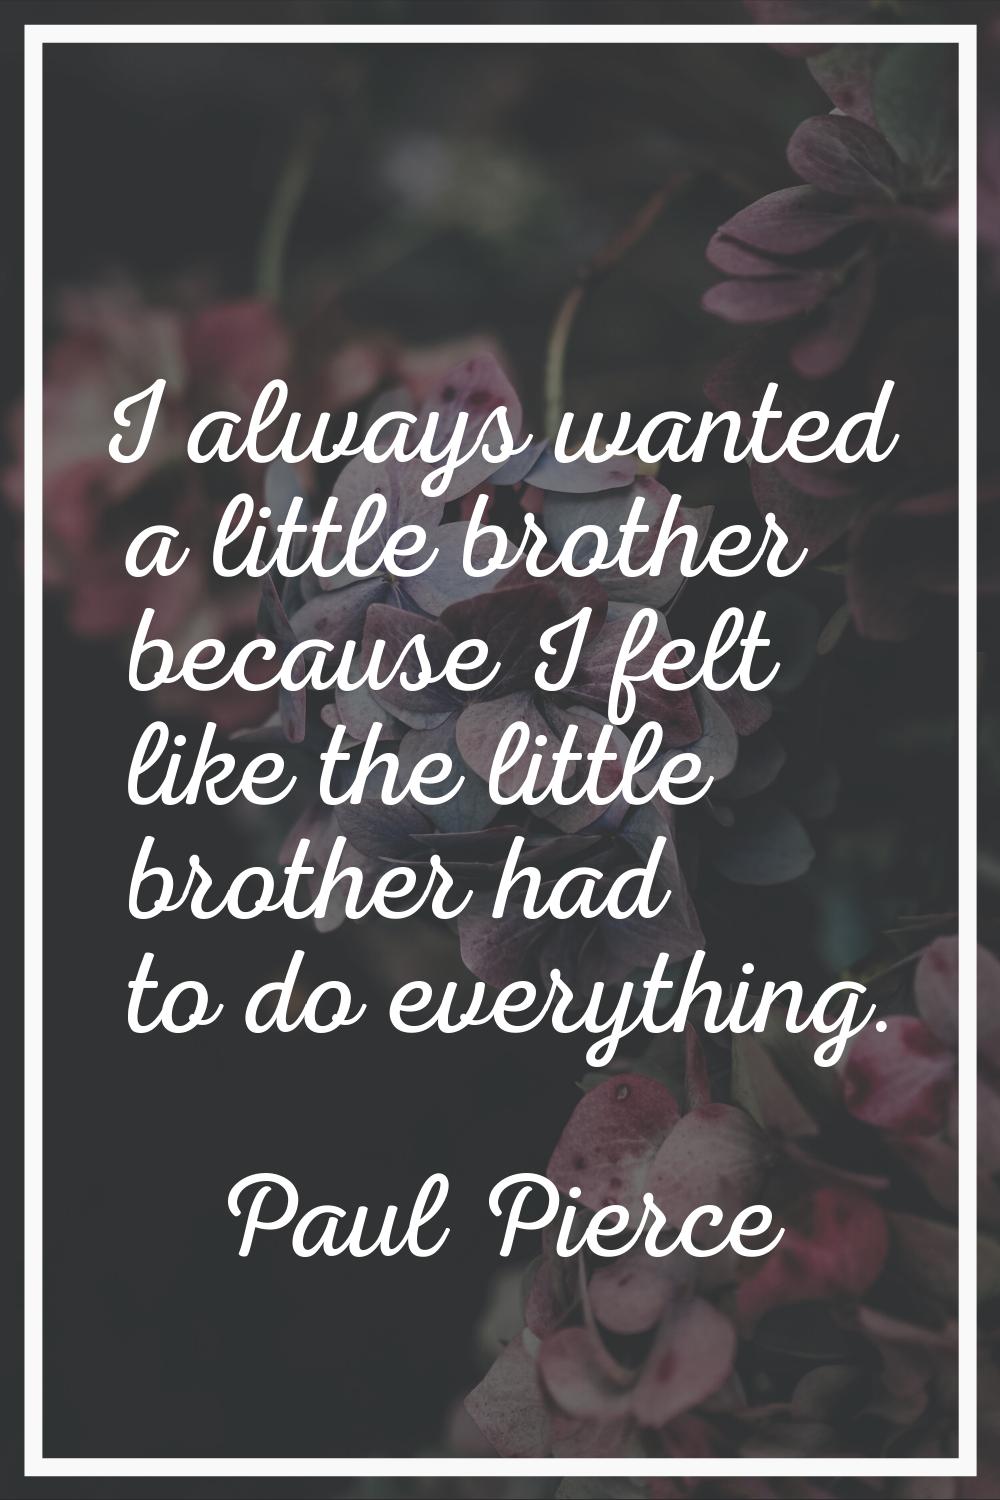 I always wanted a little brother because I felt like the little brother had to do everything.